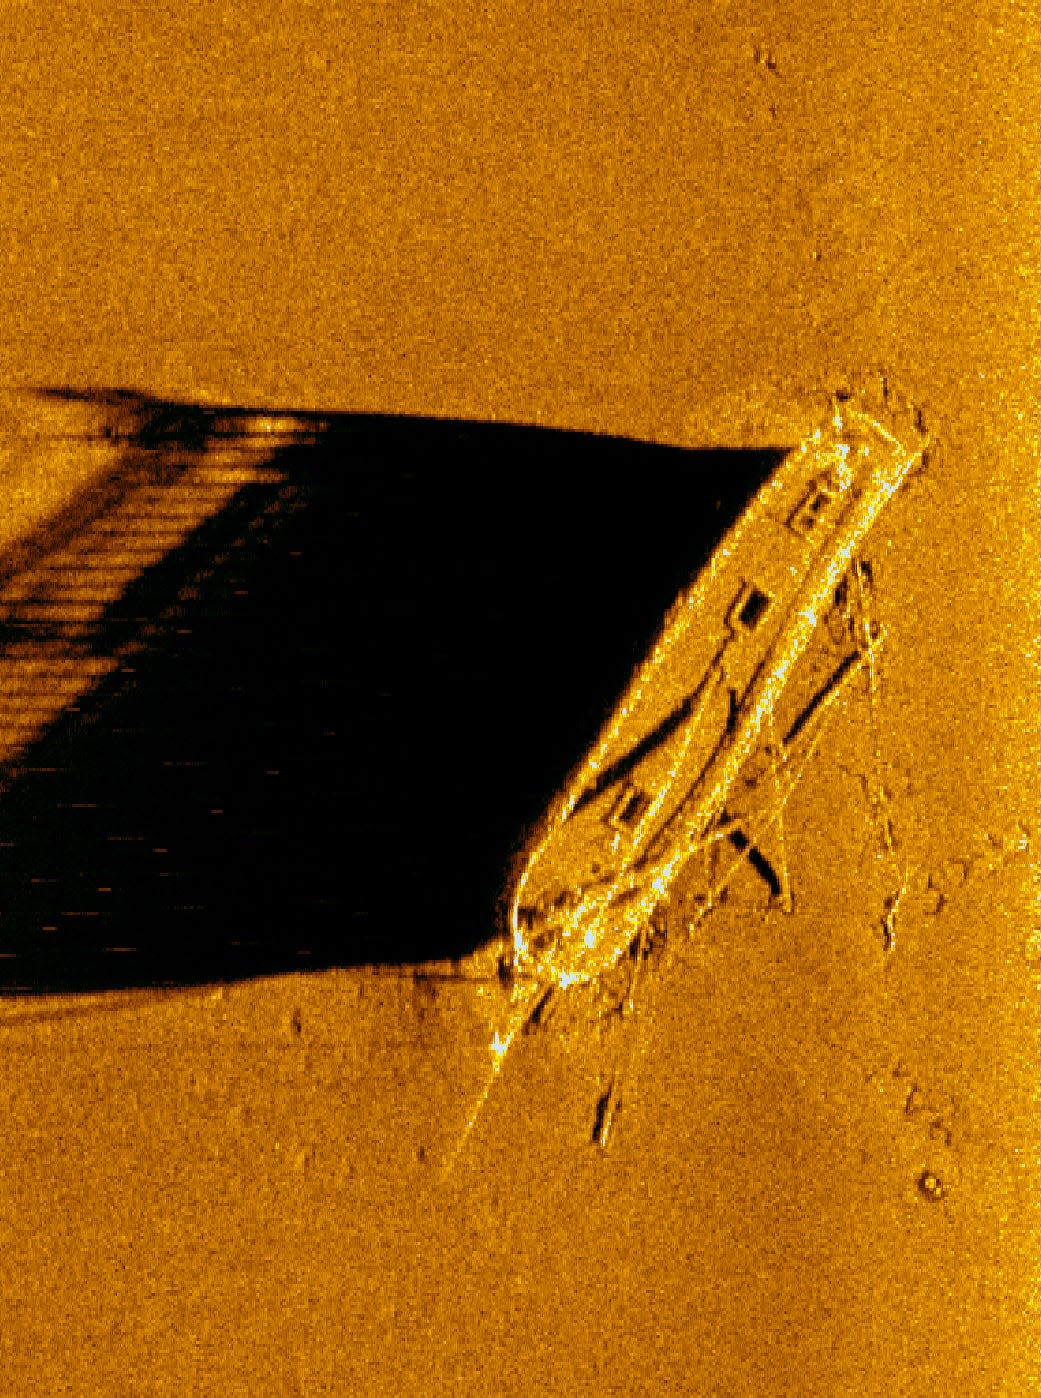 A sonar image of the schooner Gallinipper resting in 210 feet of water in the Wisconsin Shipwreck Coast National Marine Sanctuary in Lake Michigan. By bouncing sound waves off the lakebed, archaeologists and other researchers can create detailed images of objects on the bottom. Built in 1832, the Gallinipper is the oldest discovered shipwreck in Wisconsin waters.